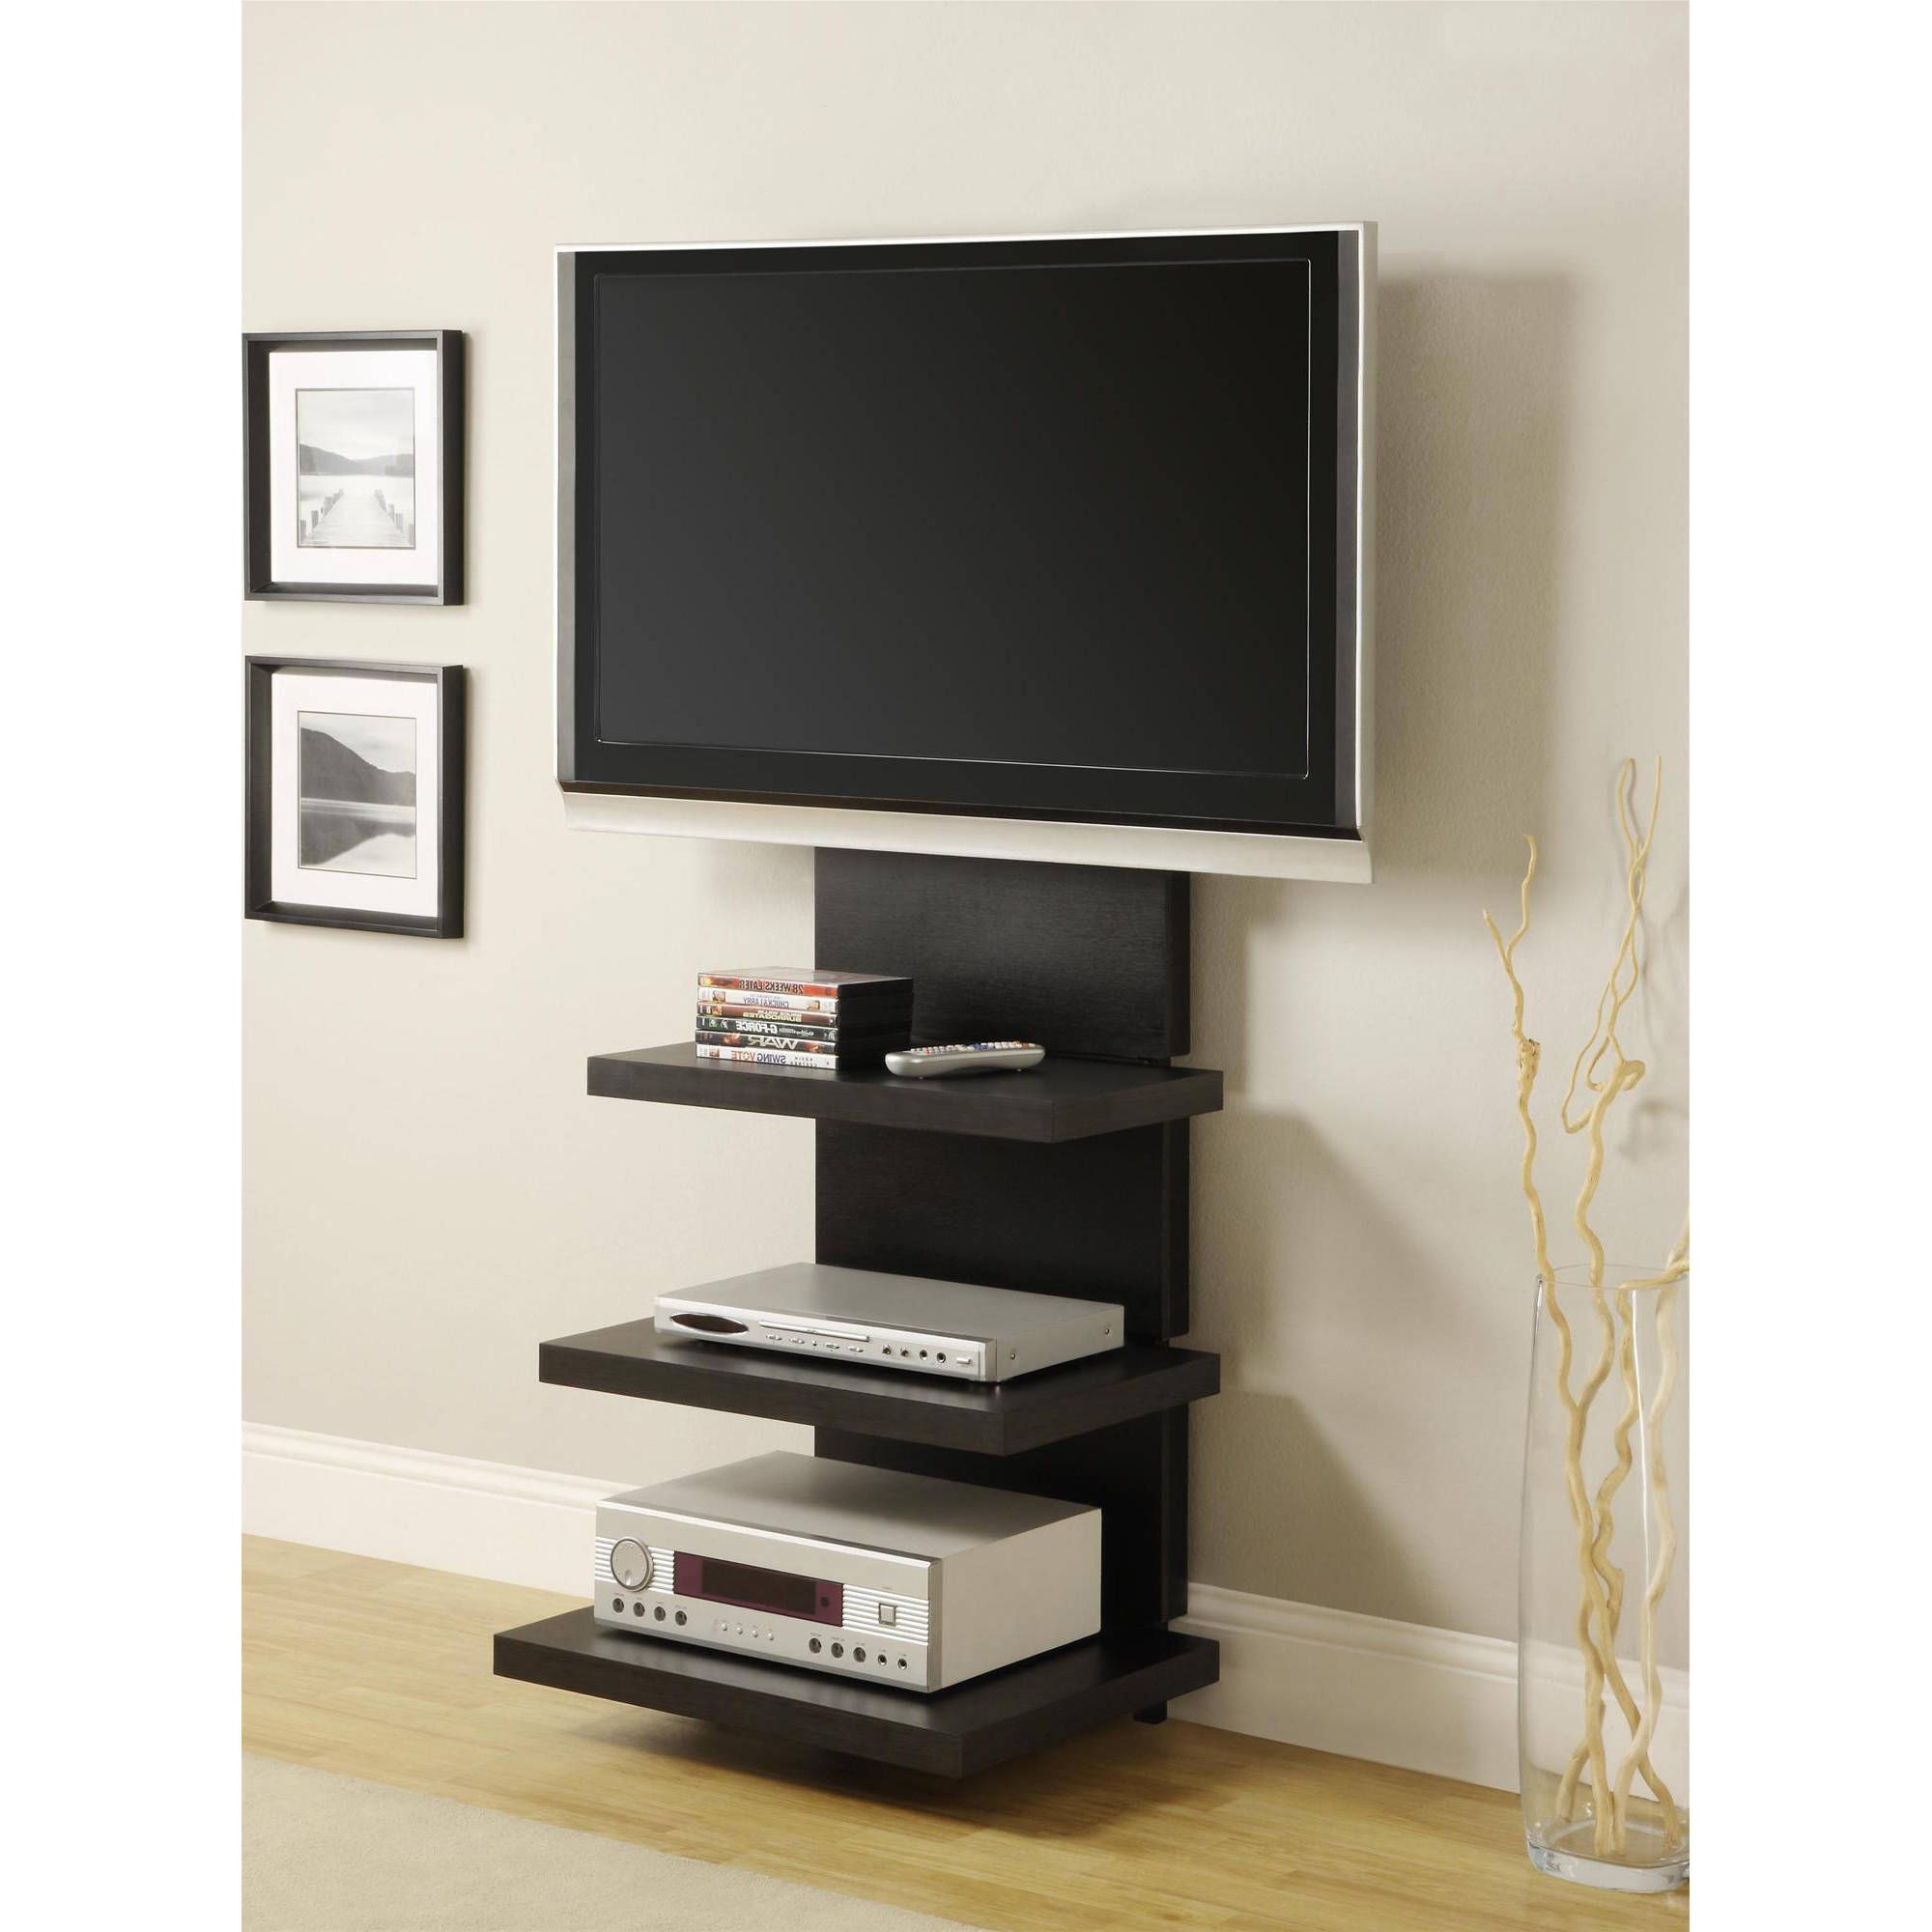 Ameriwood Home Elevation Altramount Tv Stand For Tvs Up To Throughout Carbon Wide Tv Stands (Gallery 5 of 20)